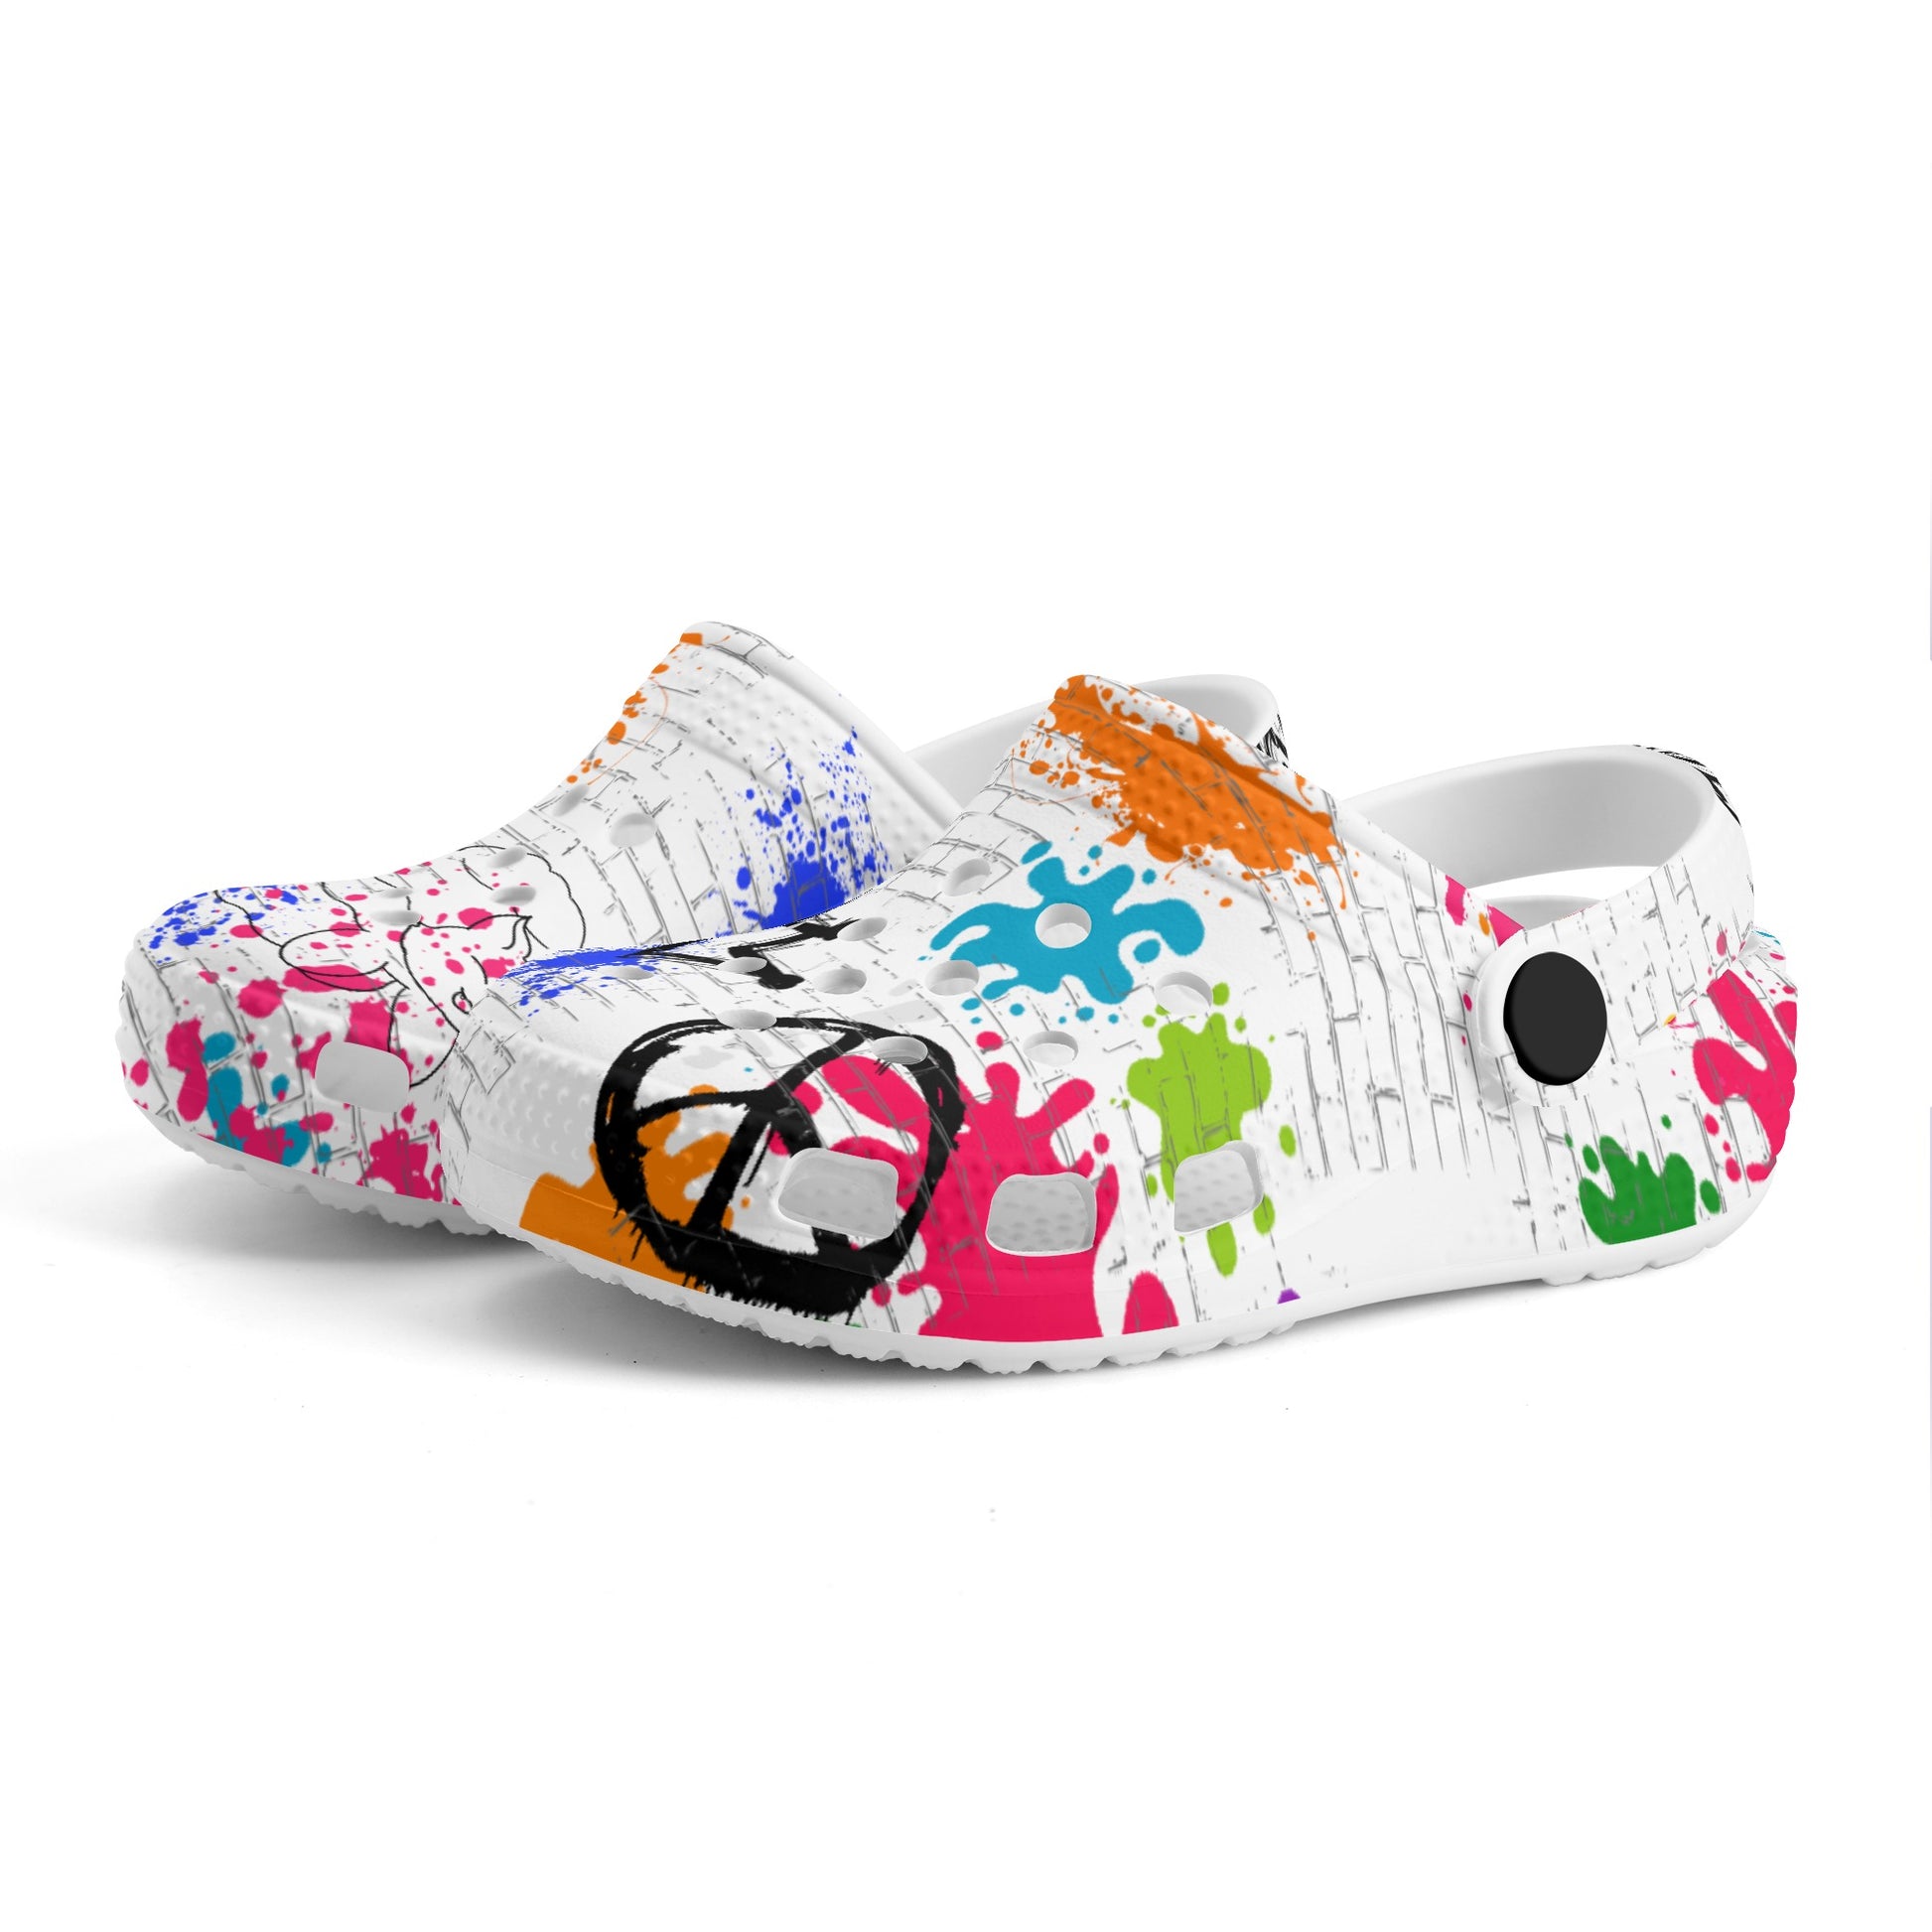 Stand out  with the  Street style kids crocs  available at Hey Nugget. Grab yours today!